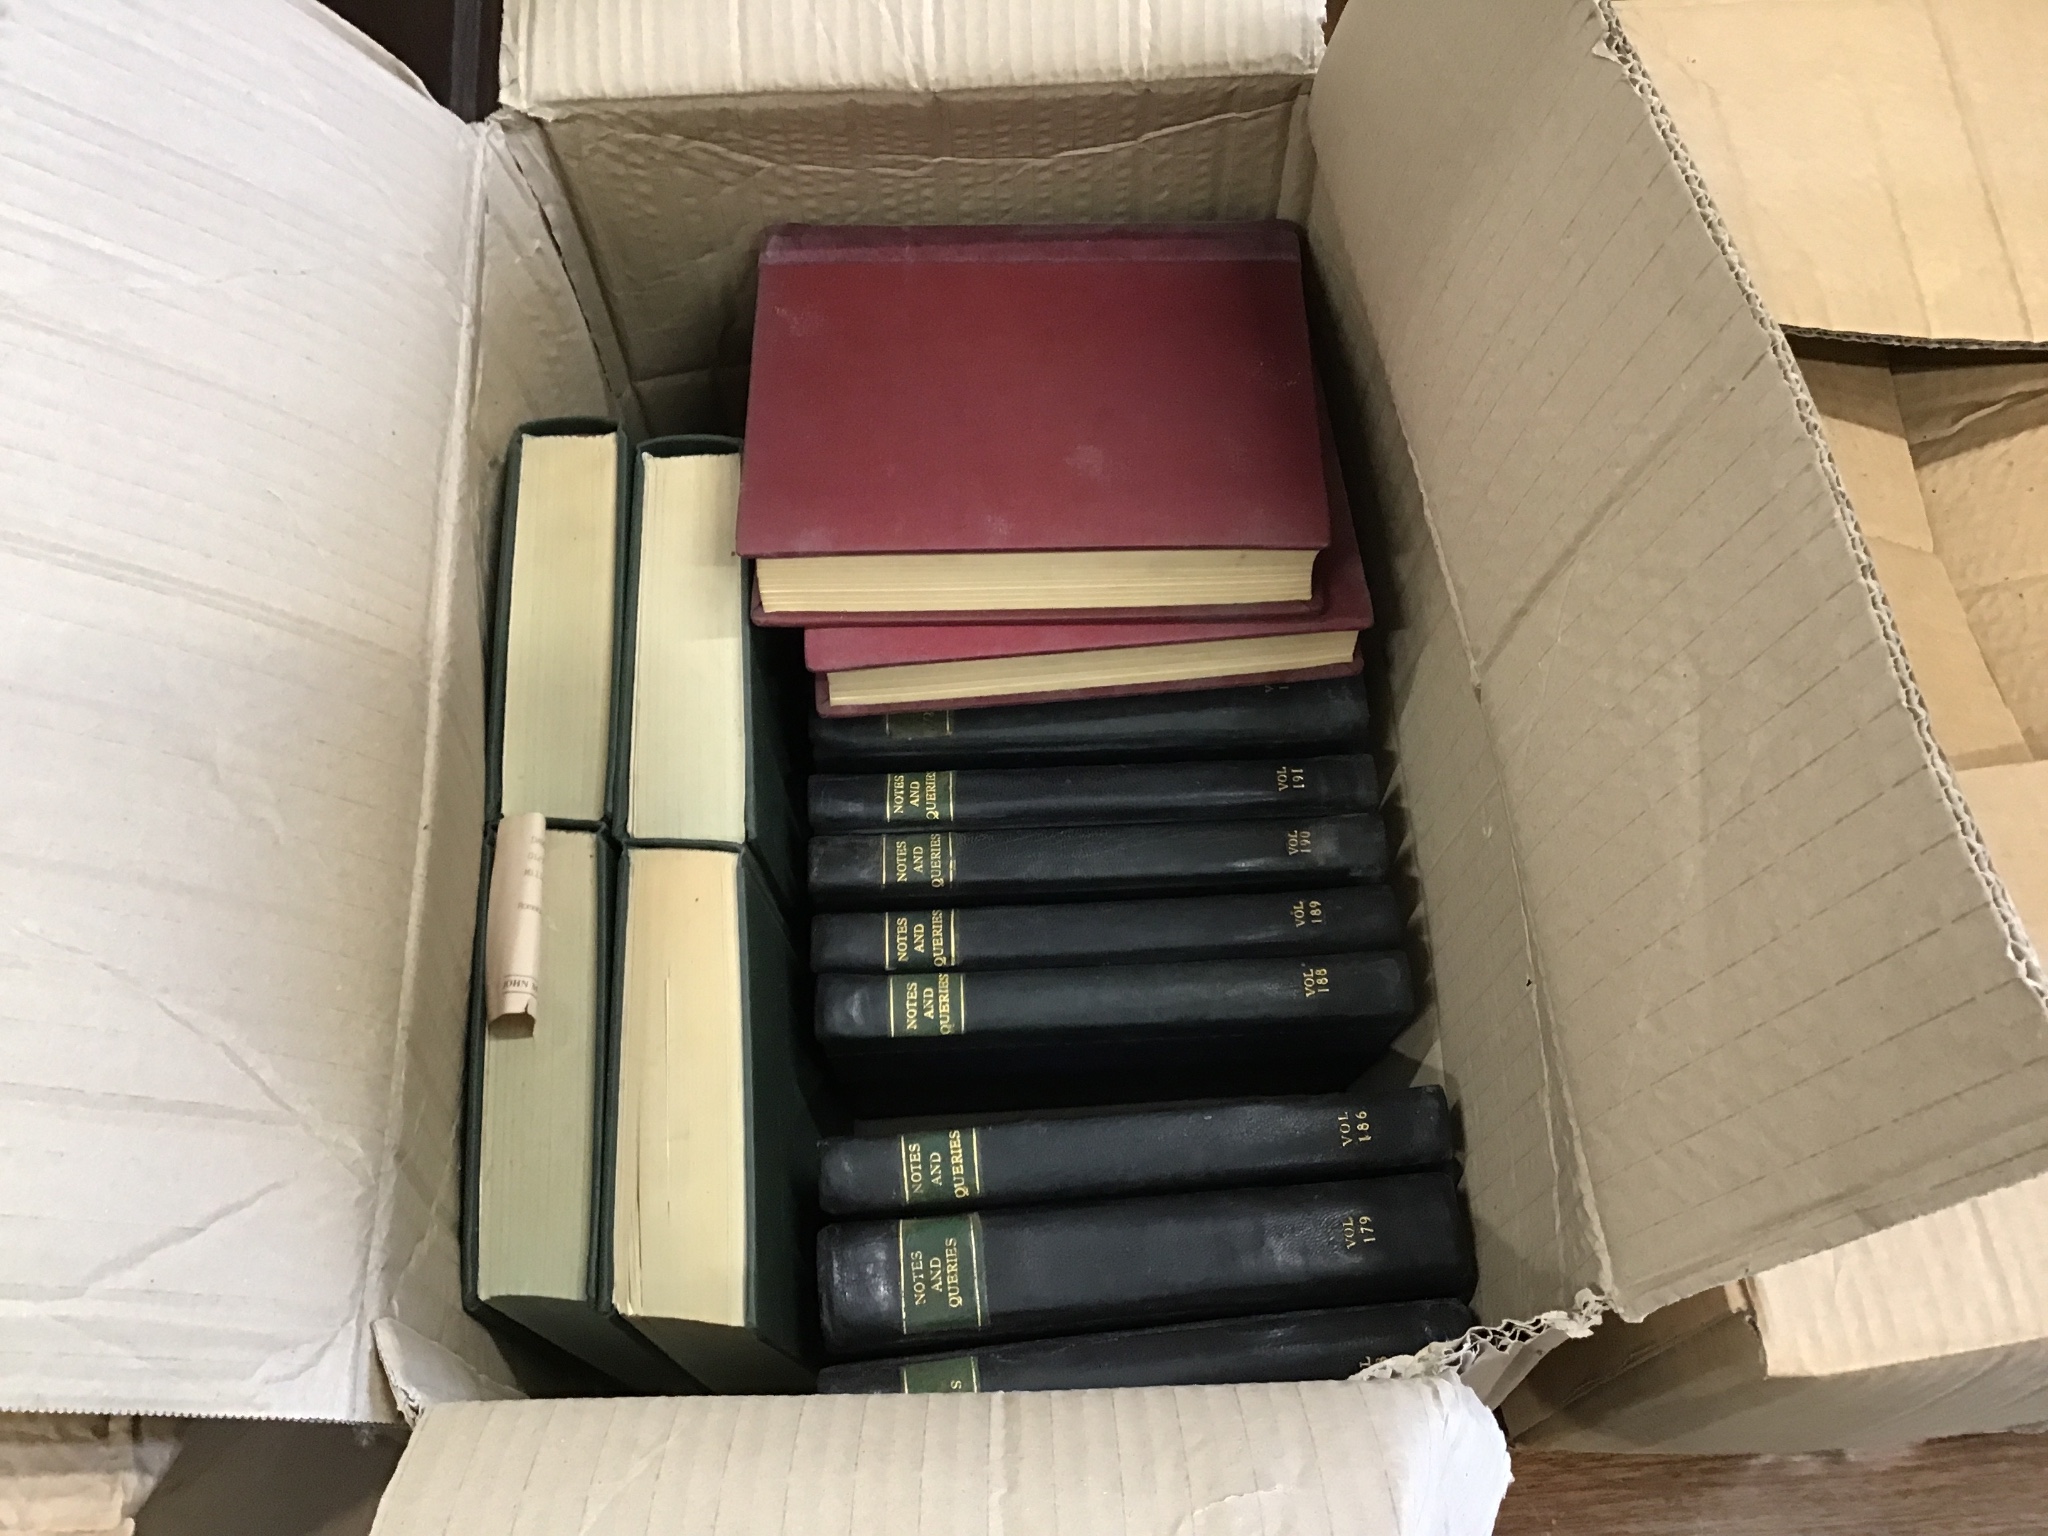 Notes and Queries, various dates, all bound